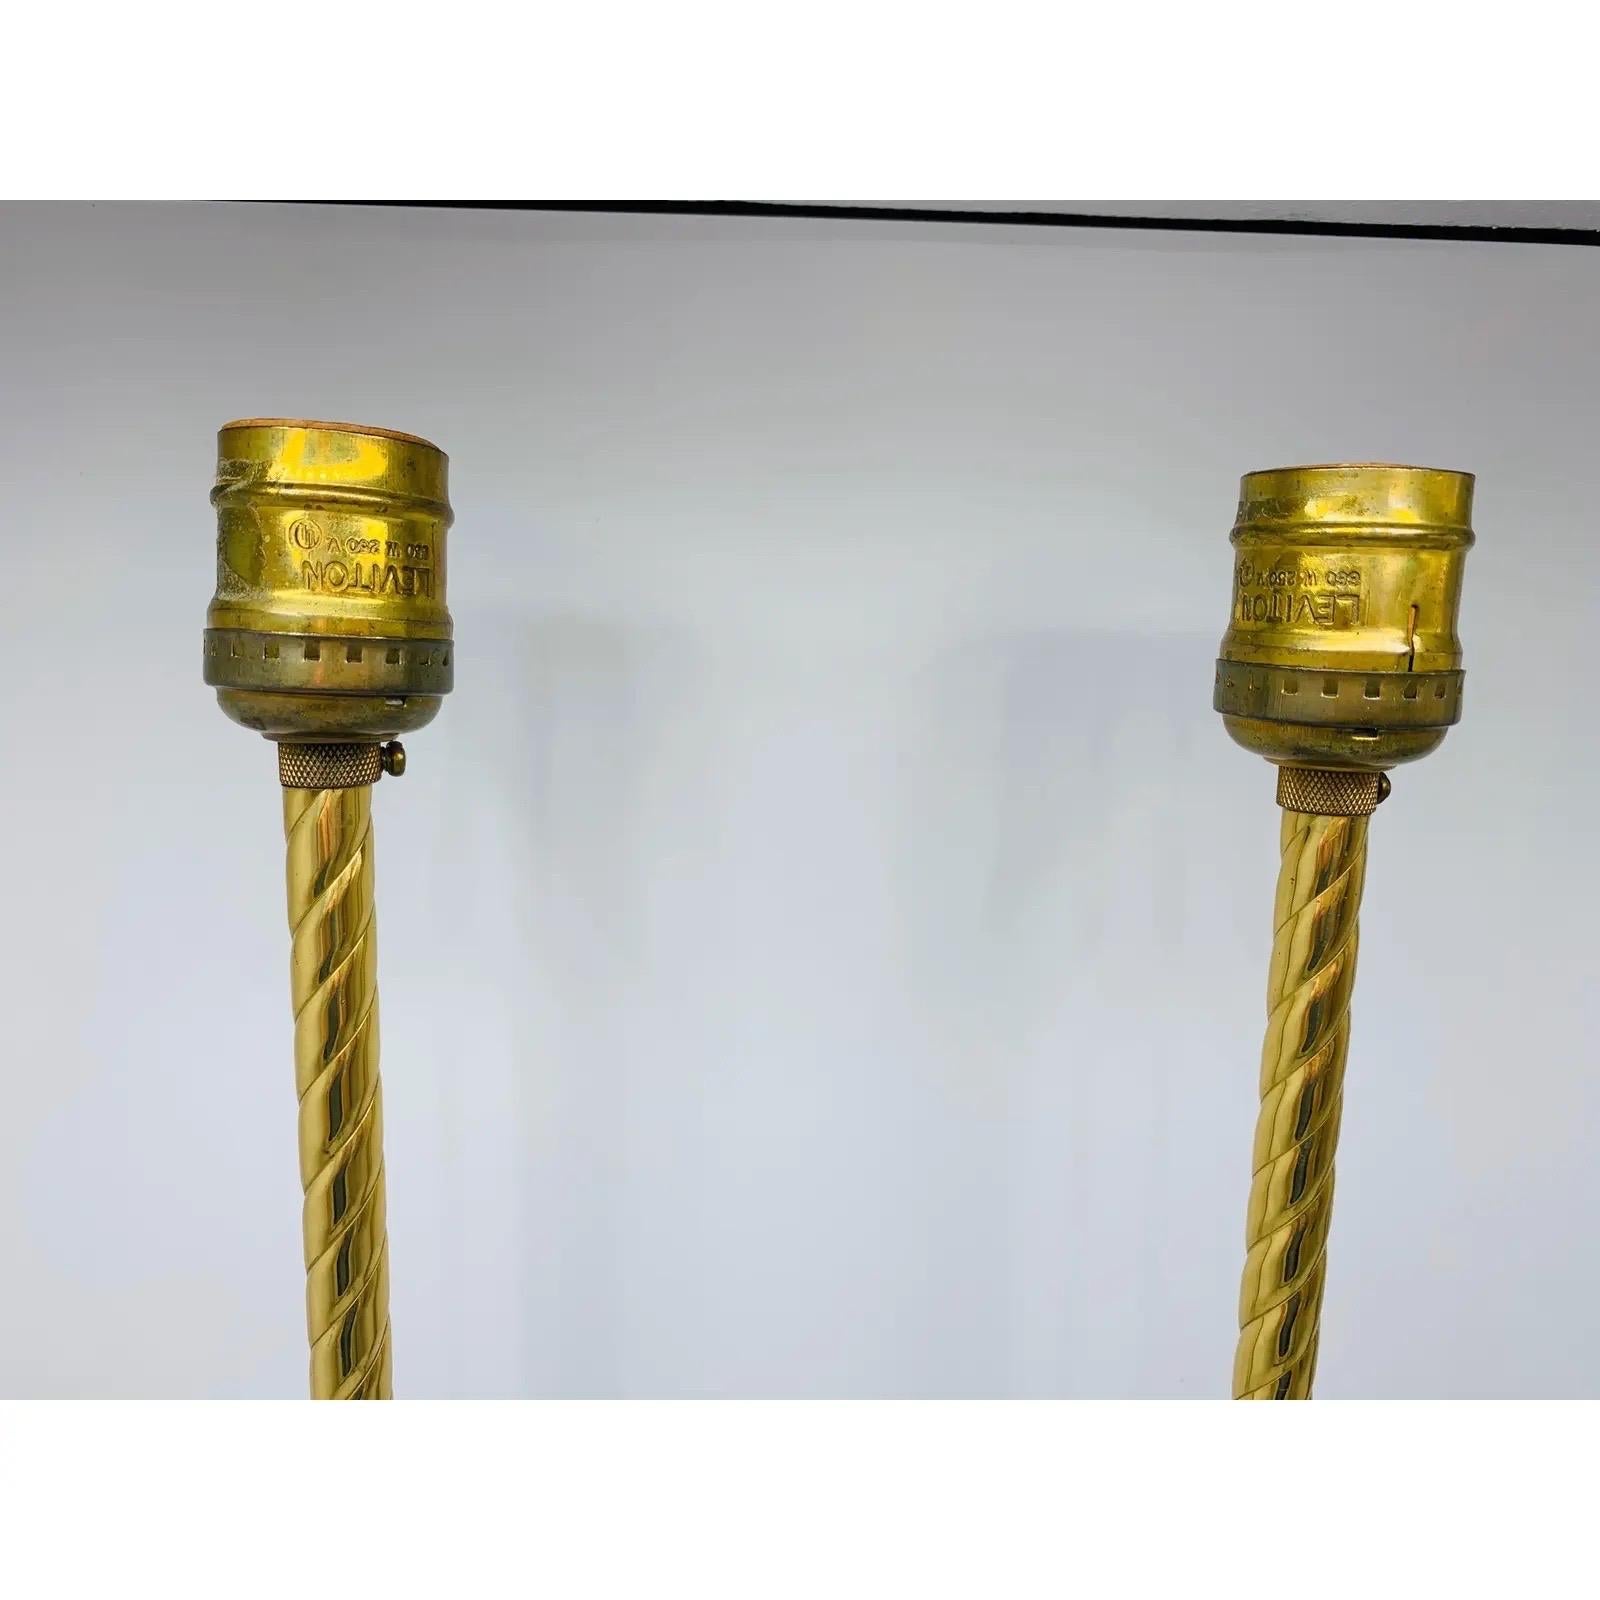 Listed is a fabulous, pair of 1960s, Italian Sarreid Ltd. gilt-wood and brass tassel lamps. The pair has lovely detailing, from top to bottom. The tassel form base is hand carved wood, with an elegant hand-applied Italian gold gilt finish with red